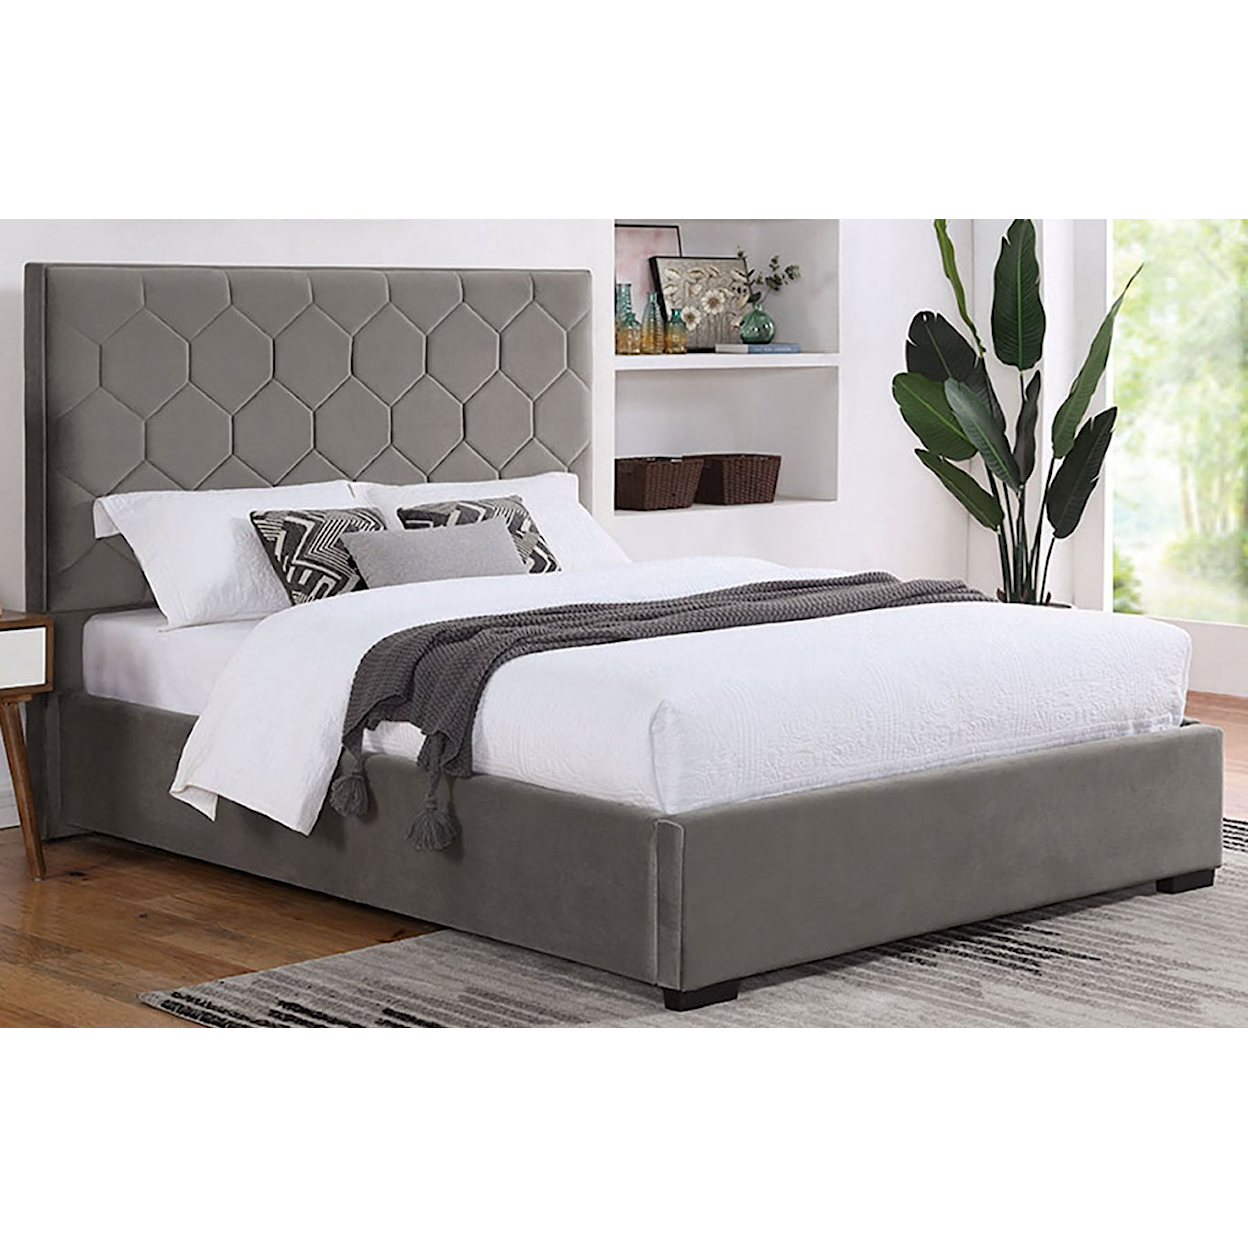 Furniture of America Gatineau Upholstered King Bed